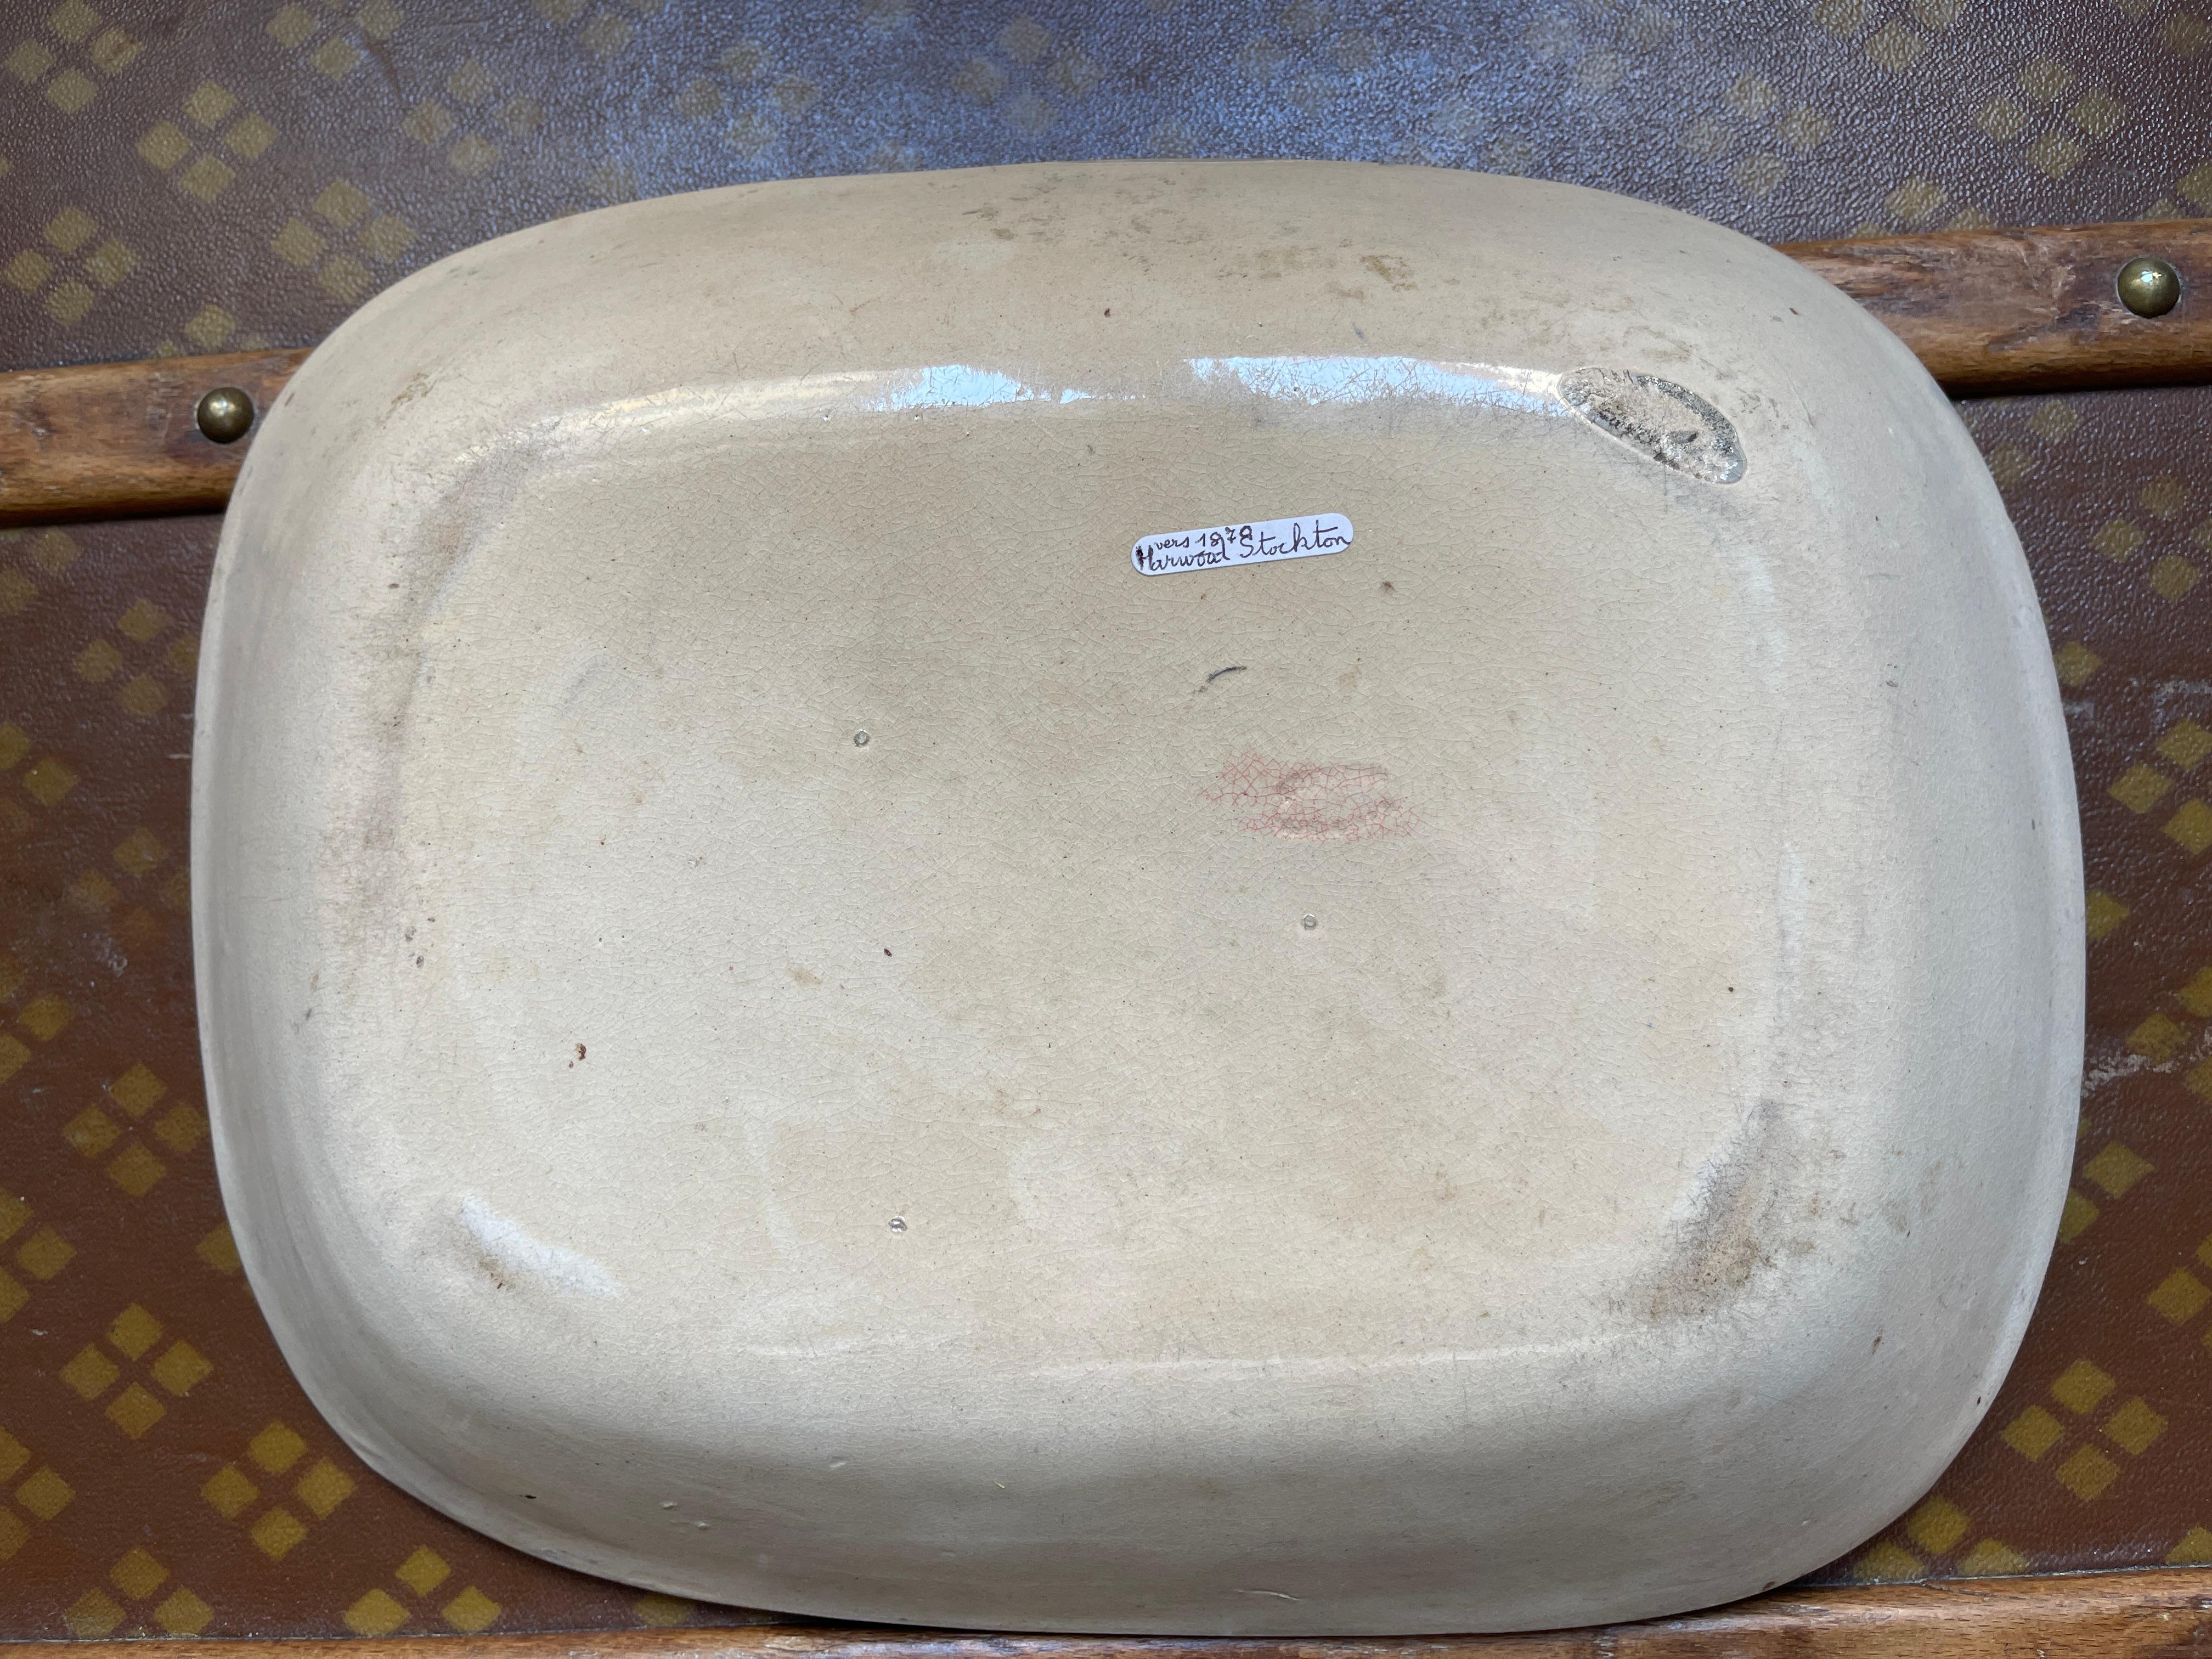 19th Century Slip Ware Dish
In excellent condition

height 33cms x width 26cms x 4cms deep